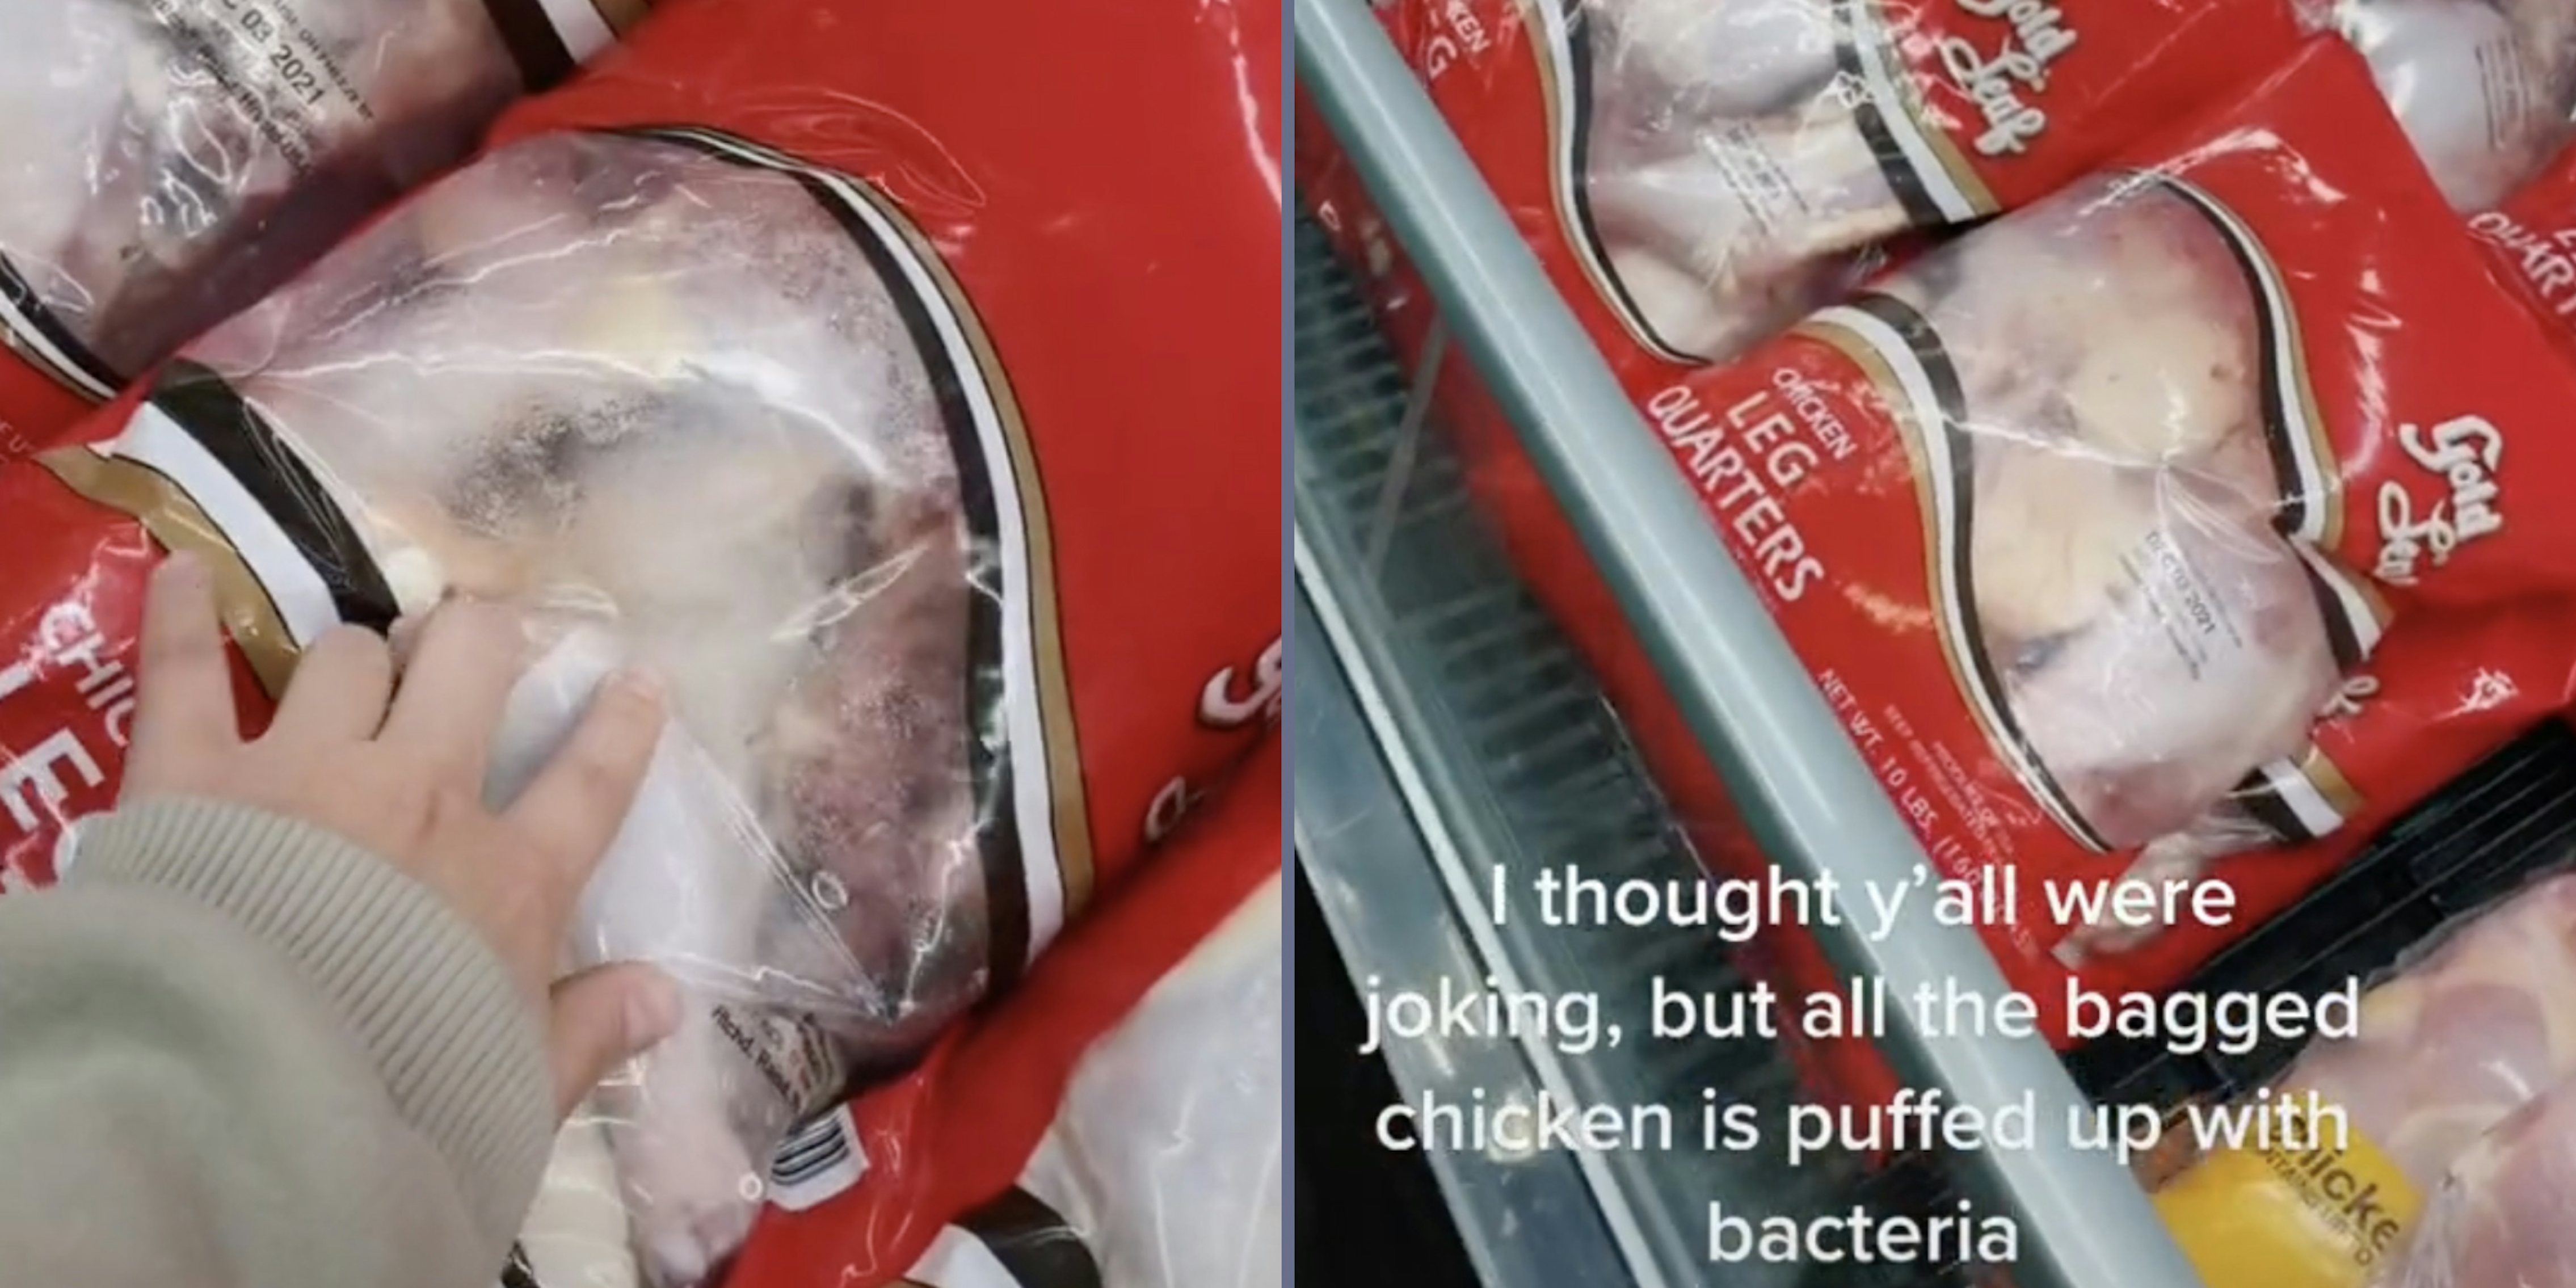 puffed up bags of chicken at walmart